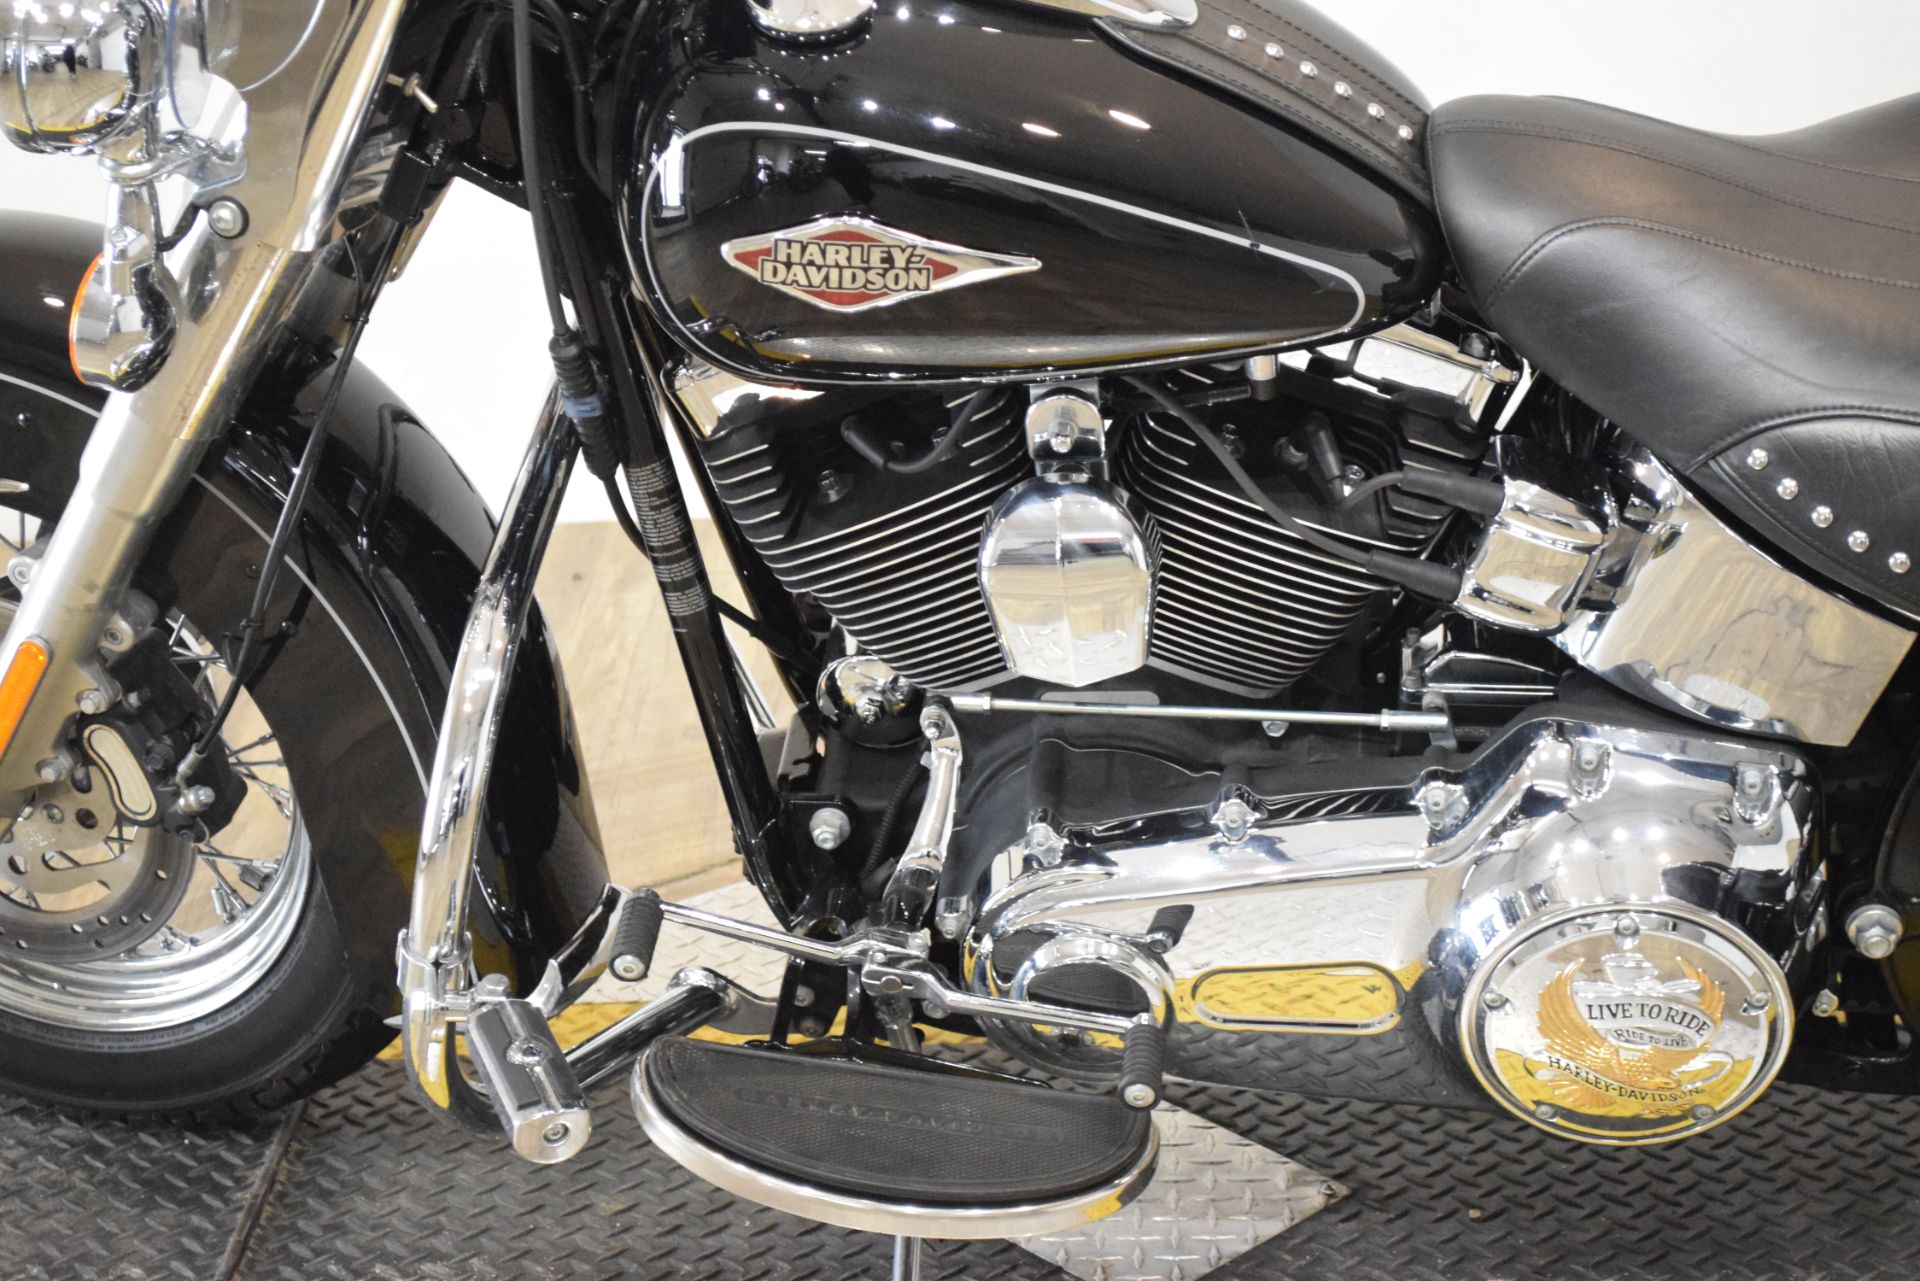 2013 Harley Davidson Heritage Softail Classic Used Motorcycle For Sale Wauconda Illinois